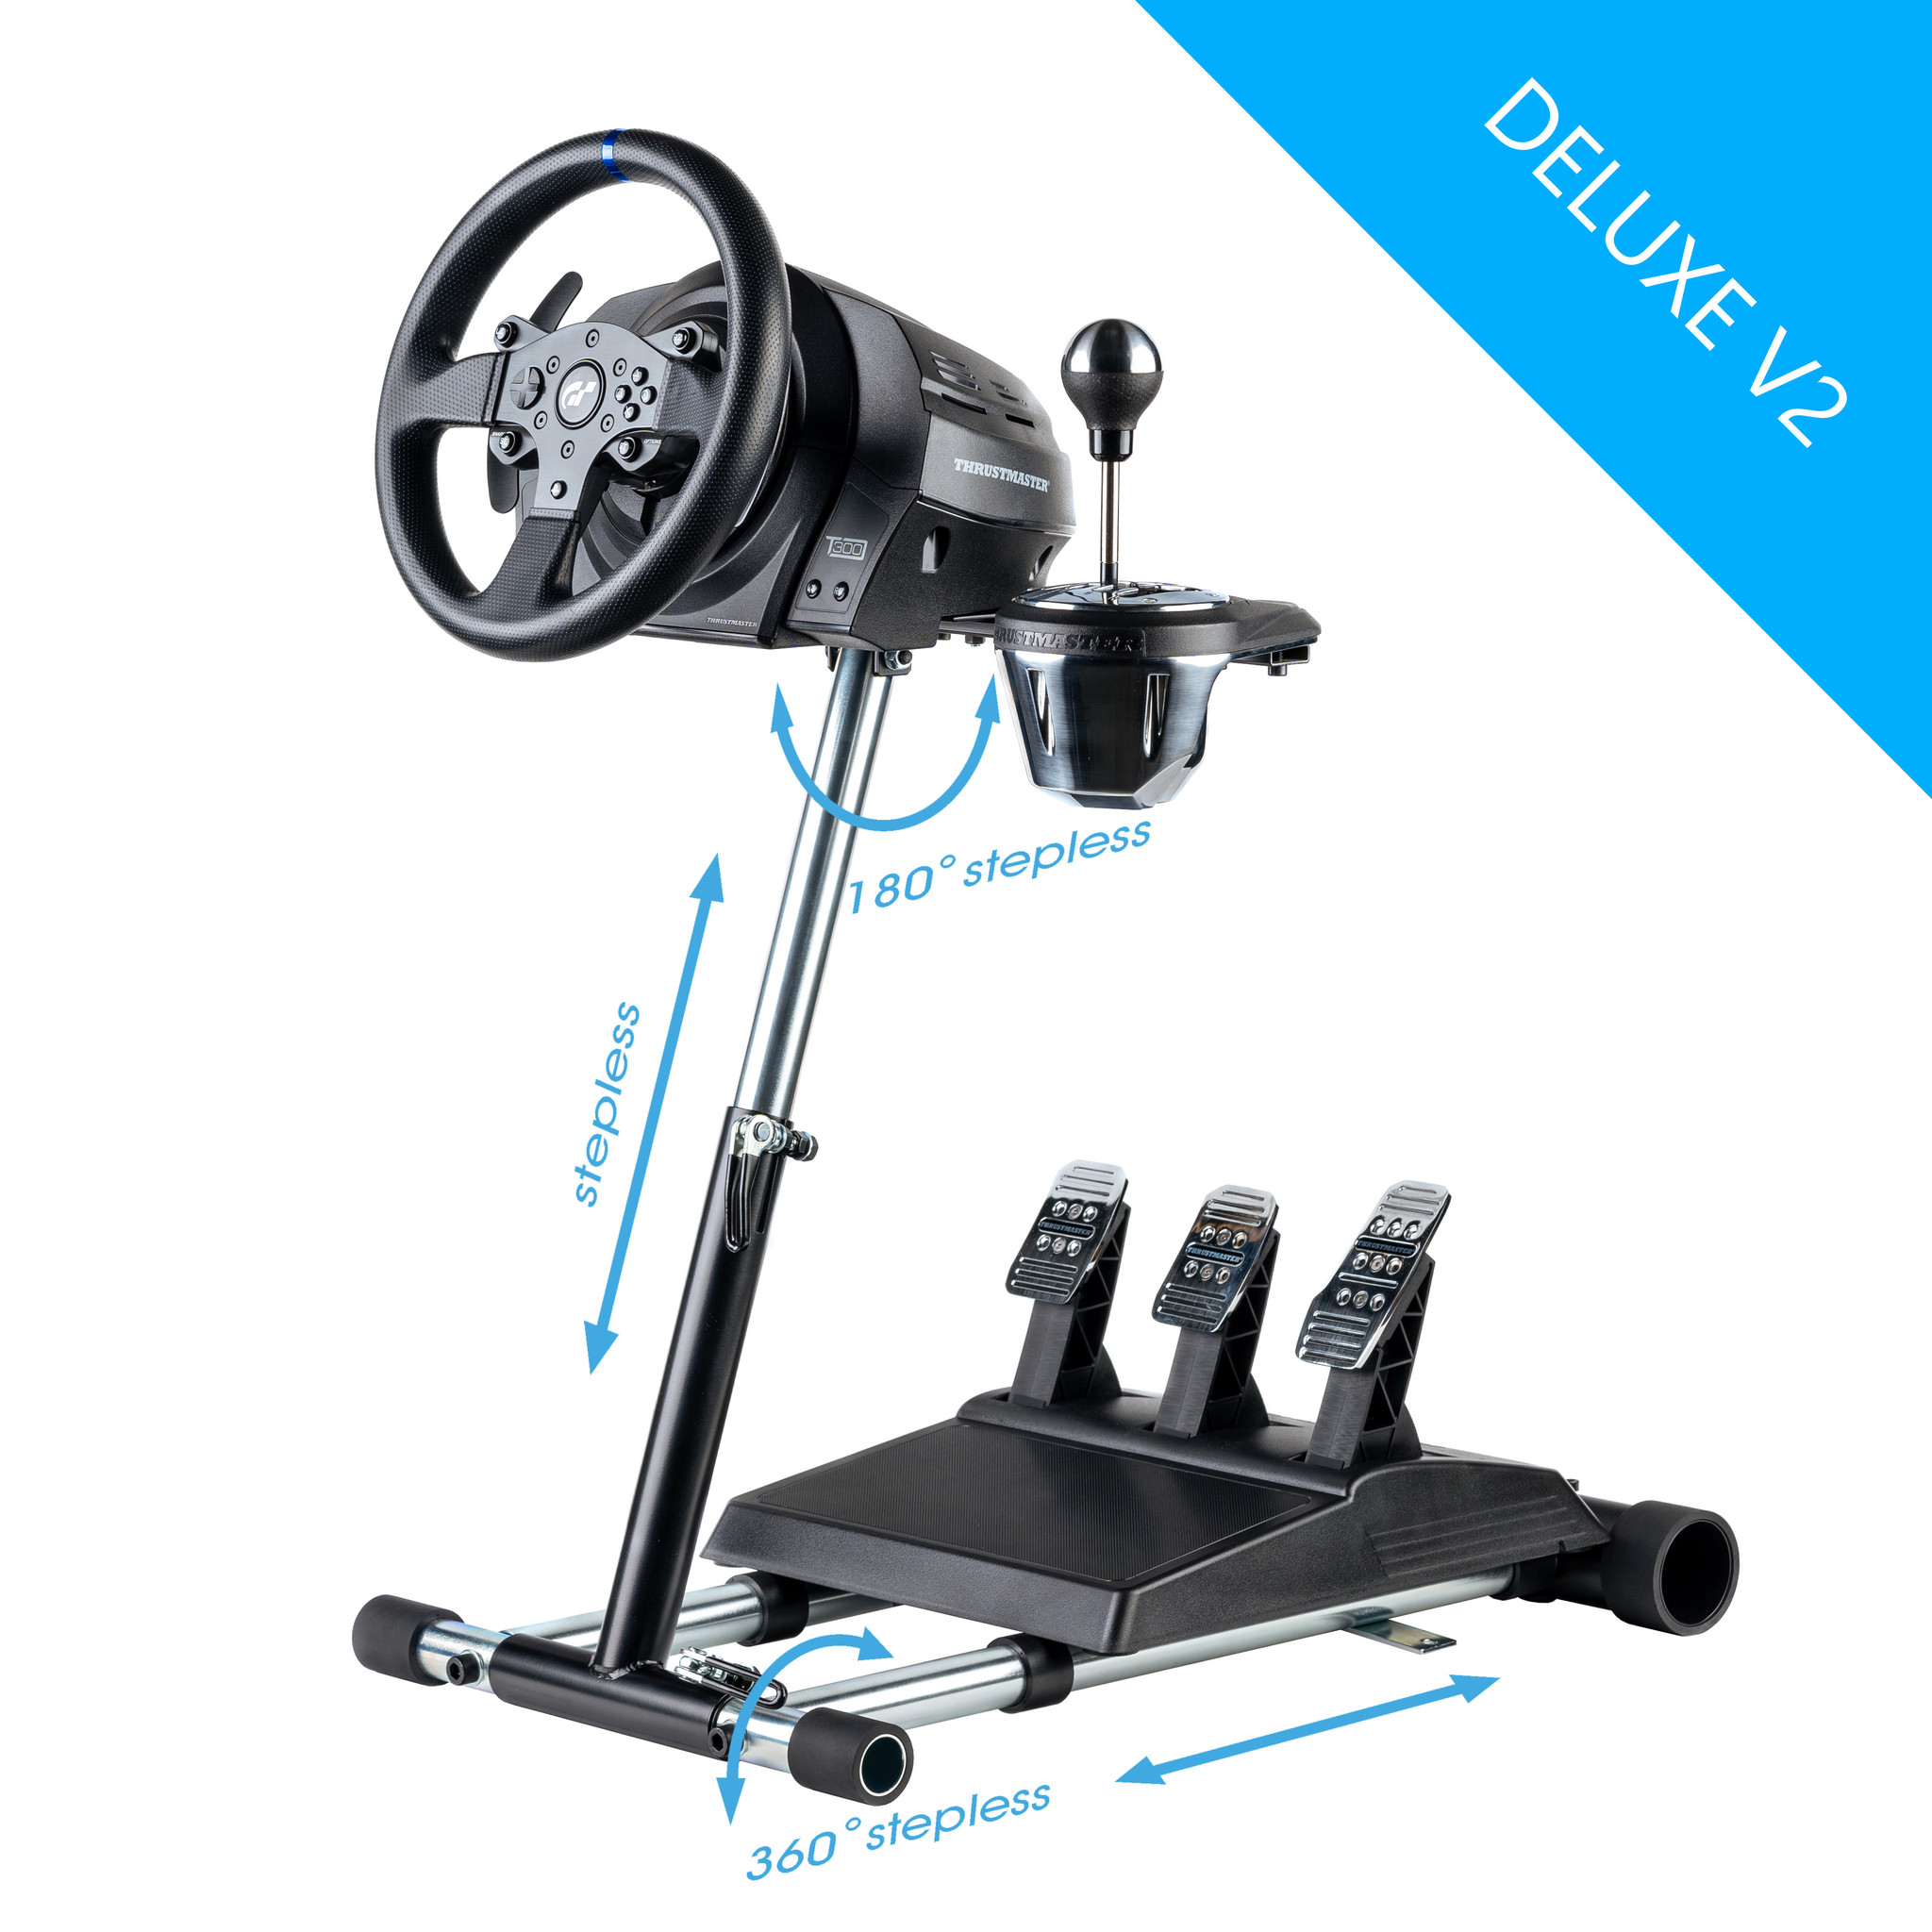 Wheel Stand Pro set up with Thrustmaster T500RS 